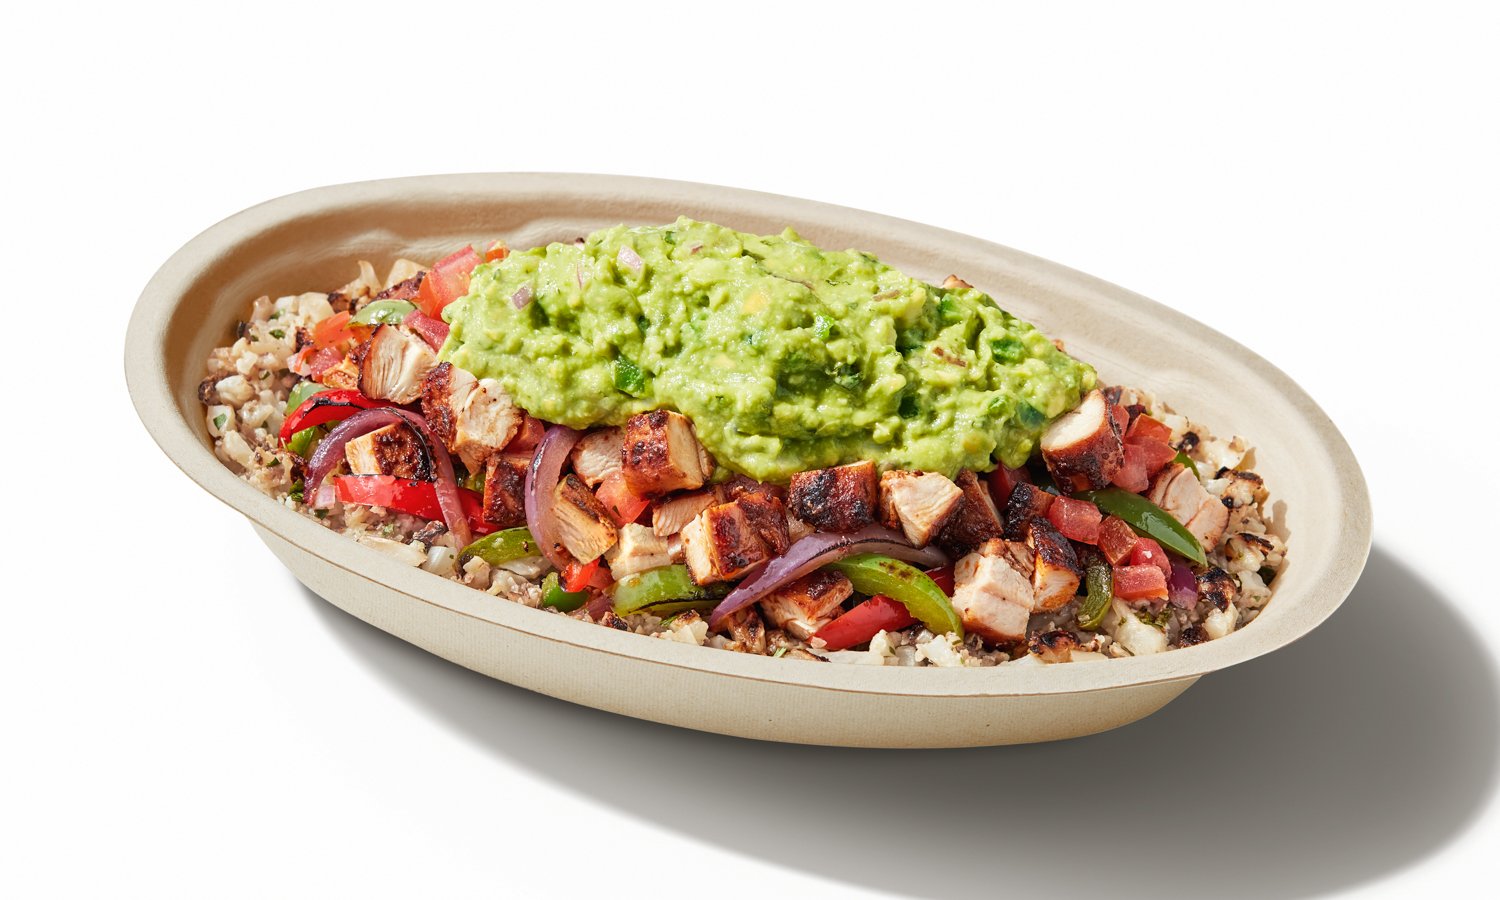 Chipotle Mexican Grill Whole30® chicken bowl